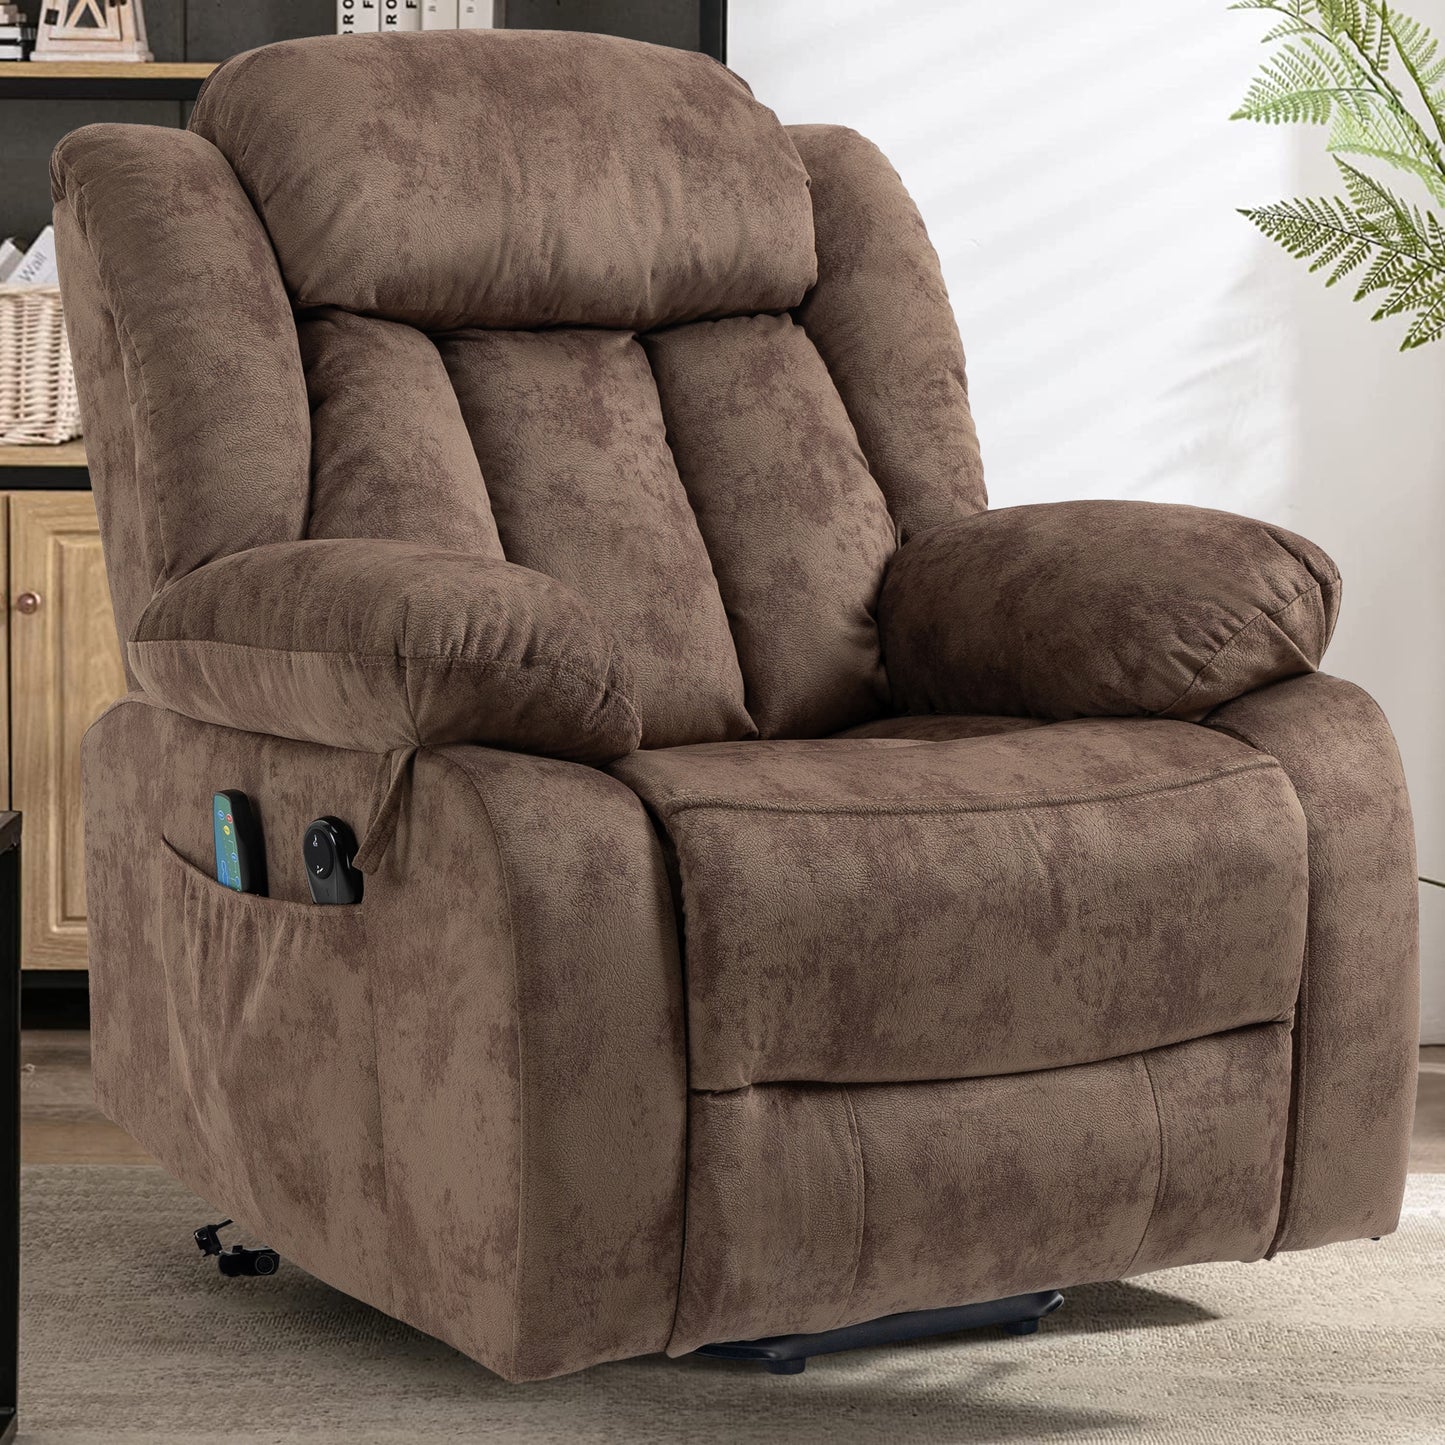 Massage Recliner Chair with Heat Function Electric Lift Chair Recliner Fabric Single Sofa Heavy Duty Living Room Bedroom Furniture Reclining Chair, Large Side Pocket, Brown